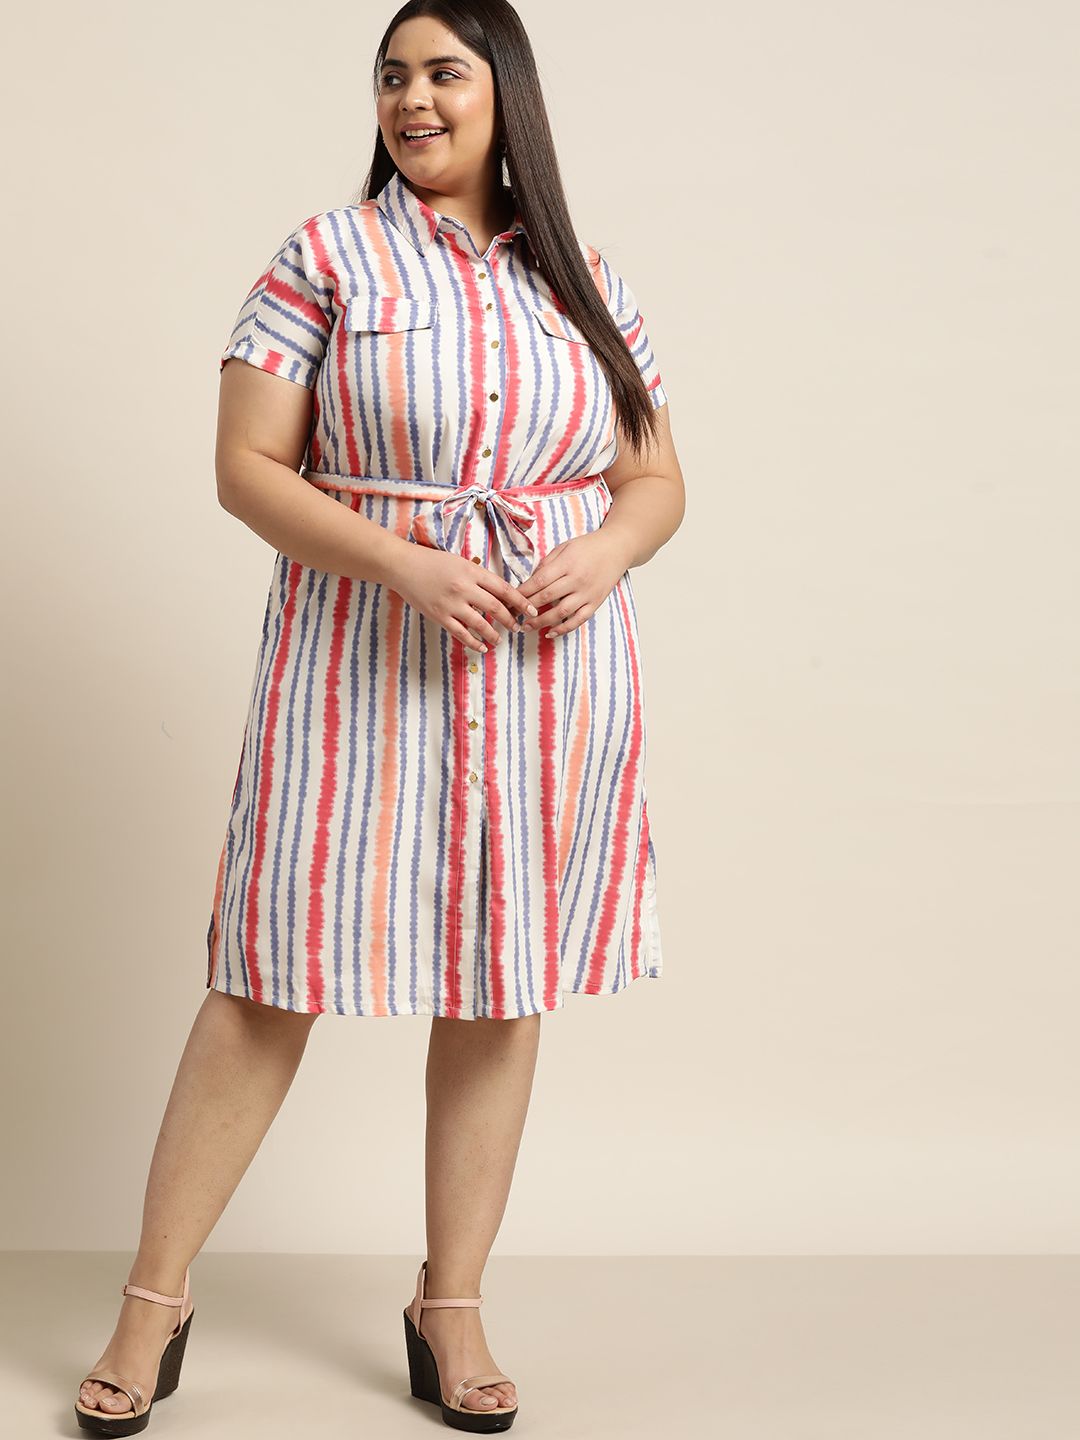 Sztori Women Plus Size Off White & Red Striped Shirt Dress with Belt Price in India